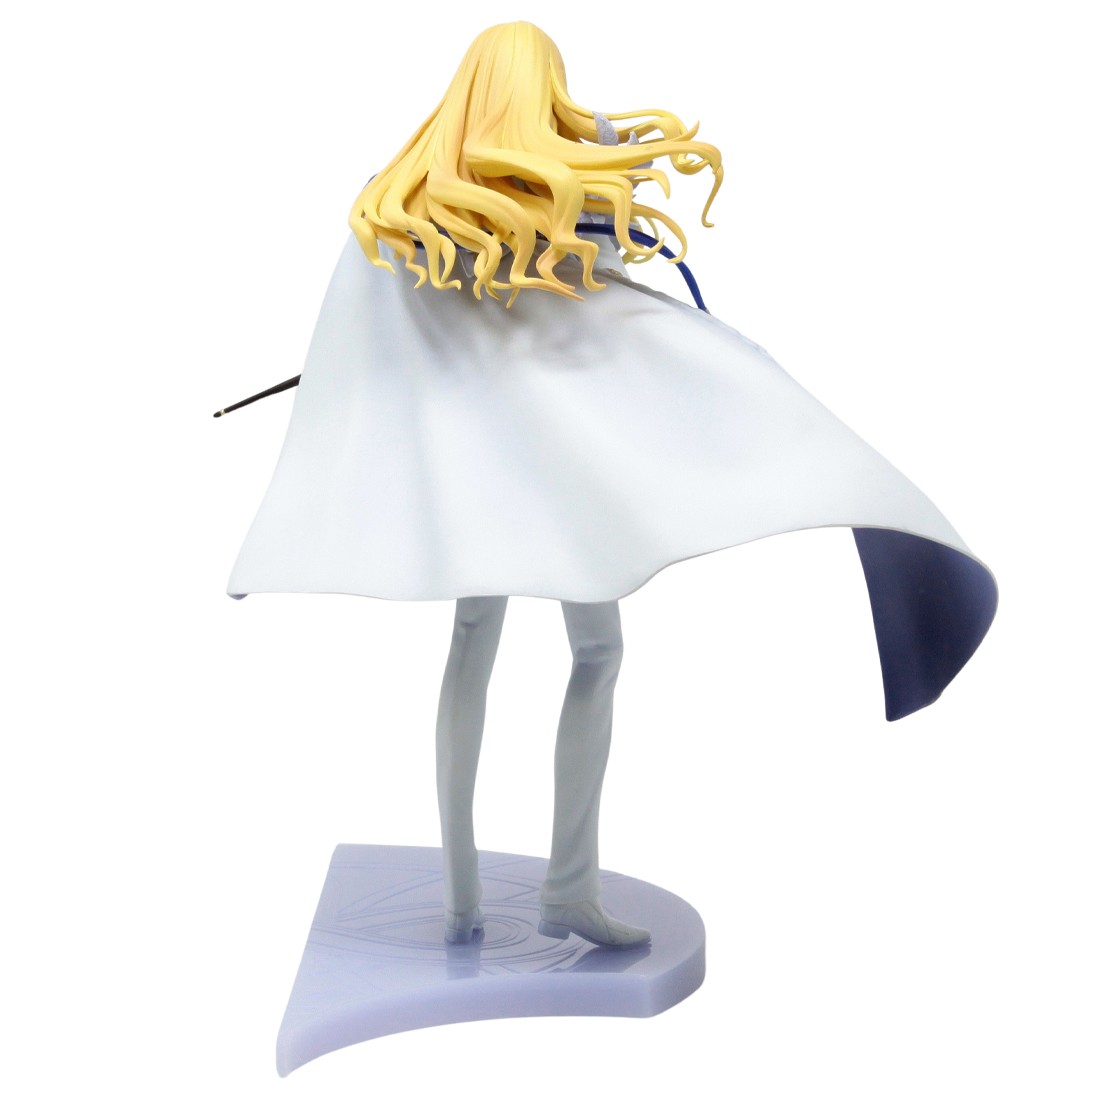 Bandai Ichibansho Fate/Grand Order Crypter/Kirschtaria Wodime Cosmos In The  Lostbelt Figure (white)